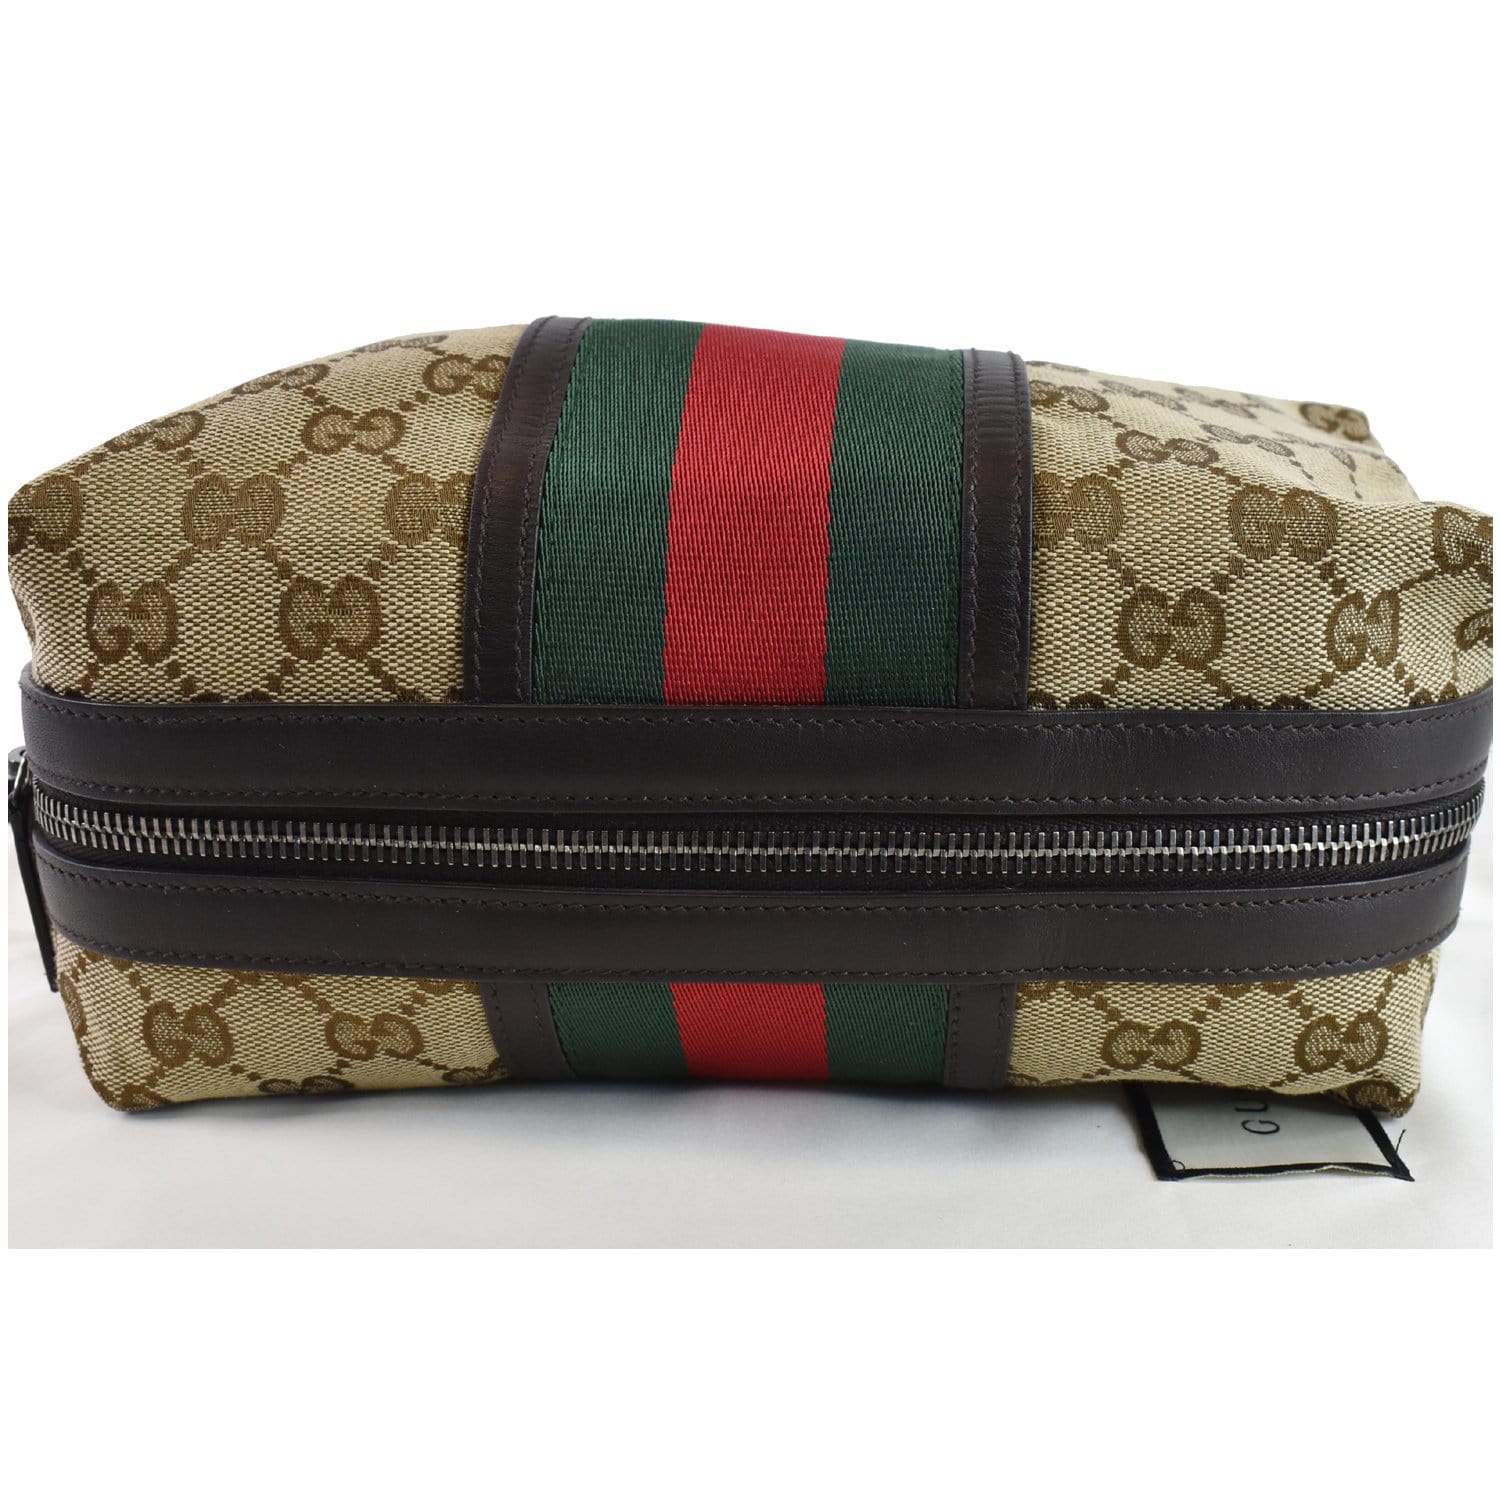 LV/ Gucci inspired tumbler sleeve – KB Blush Boutique